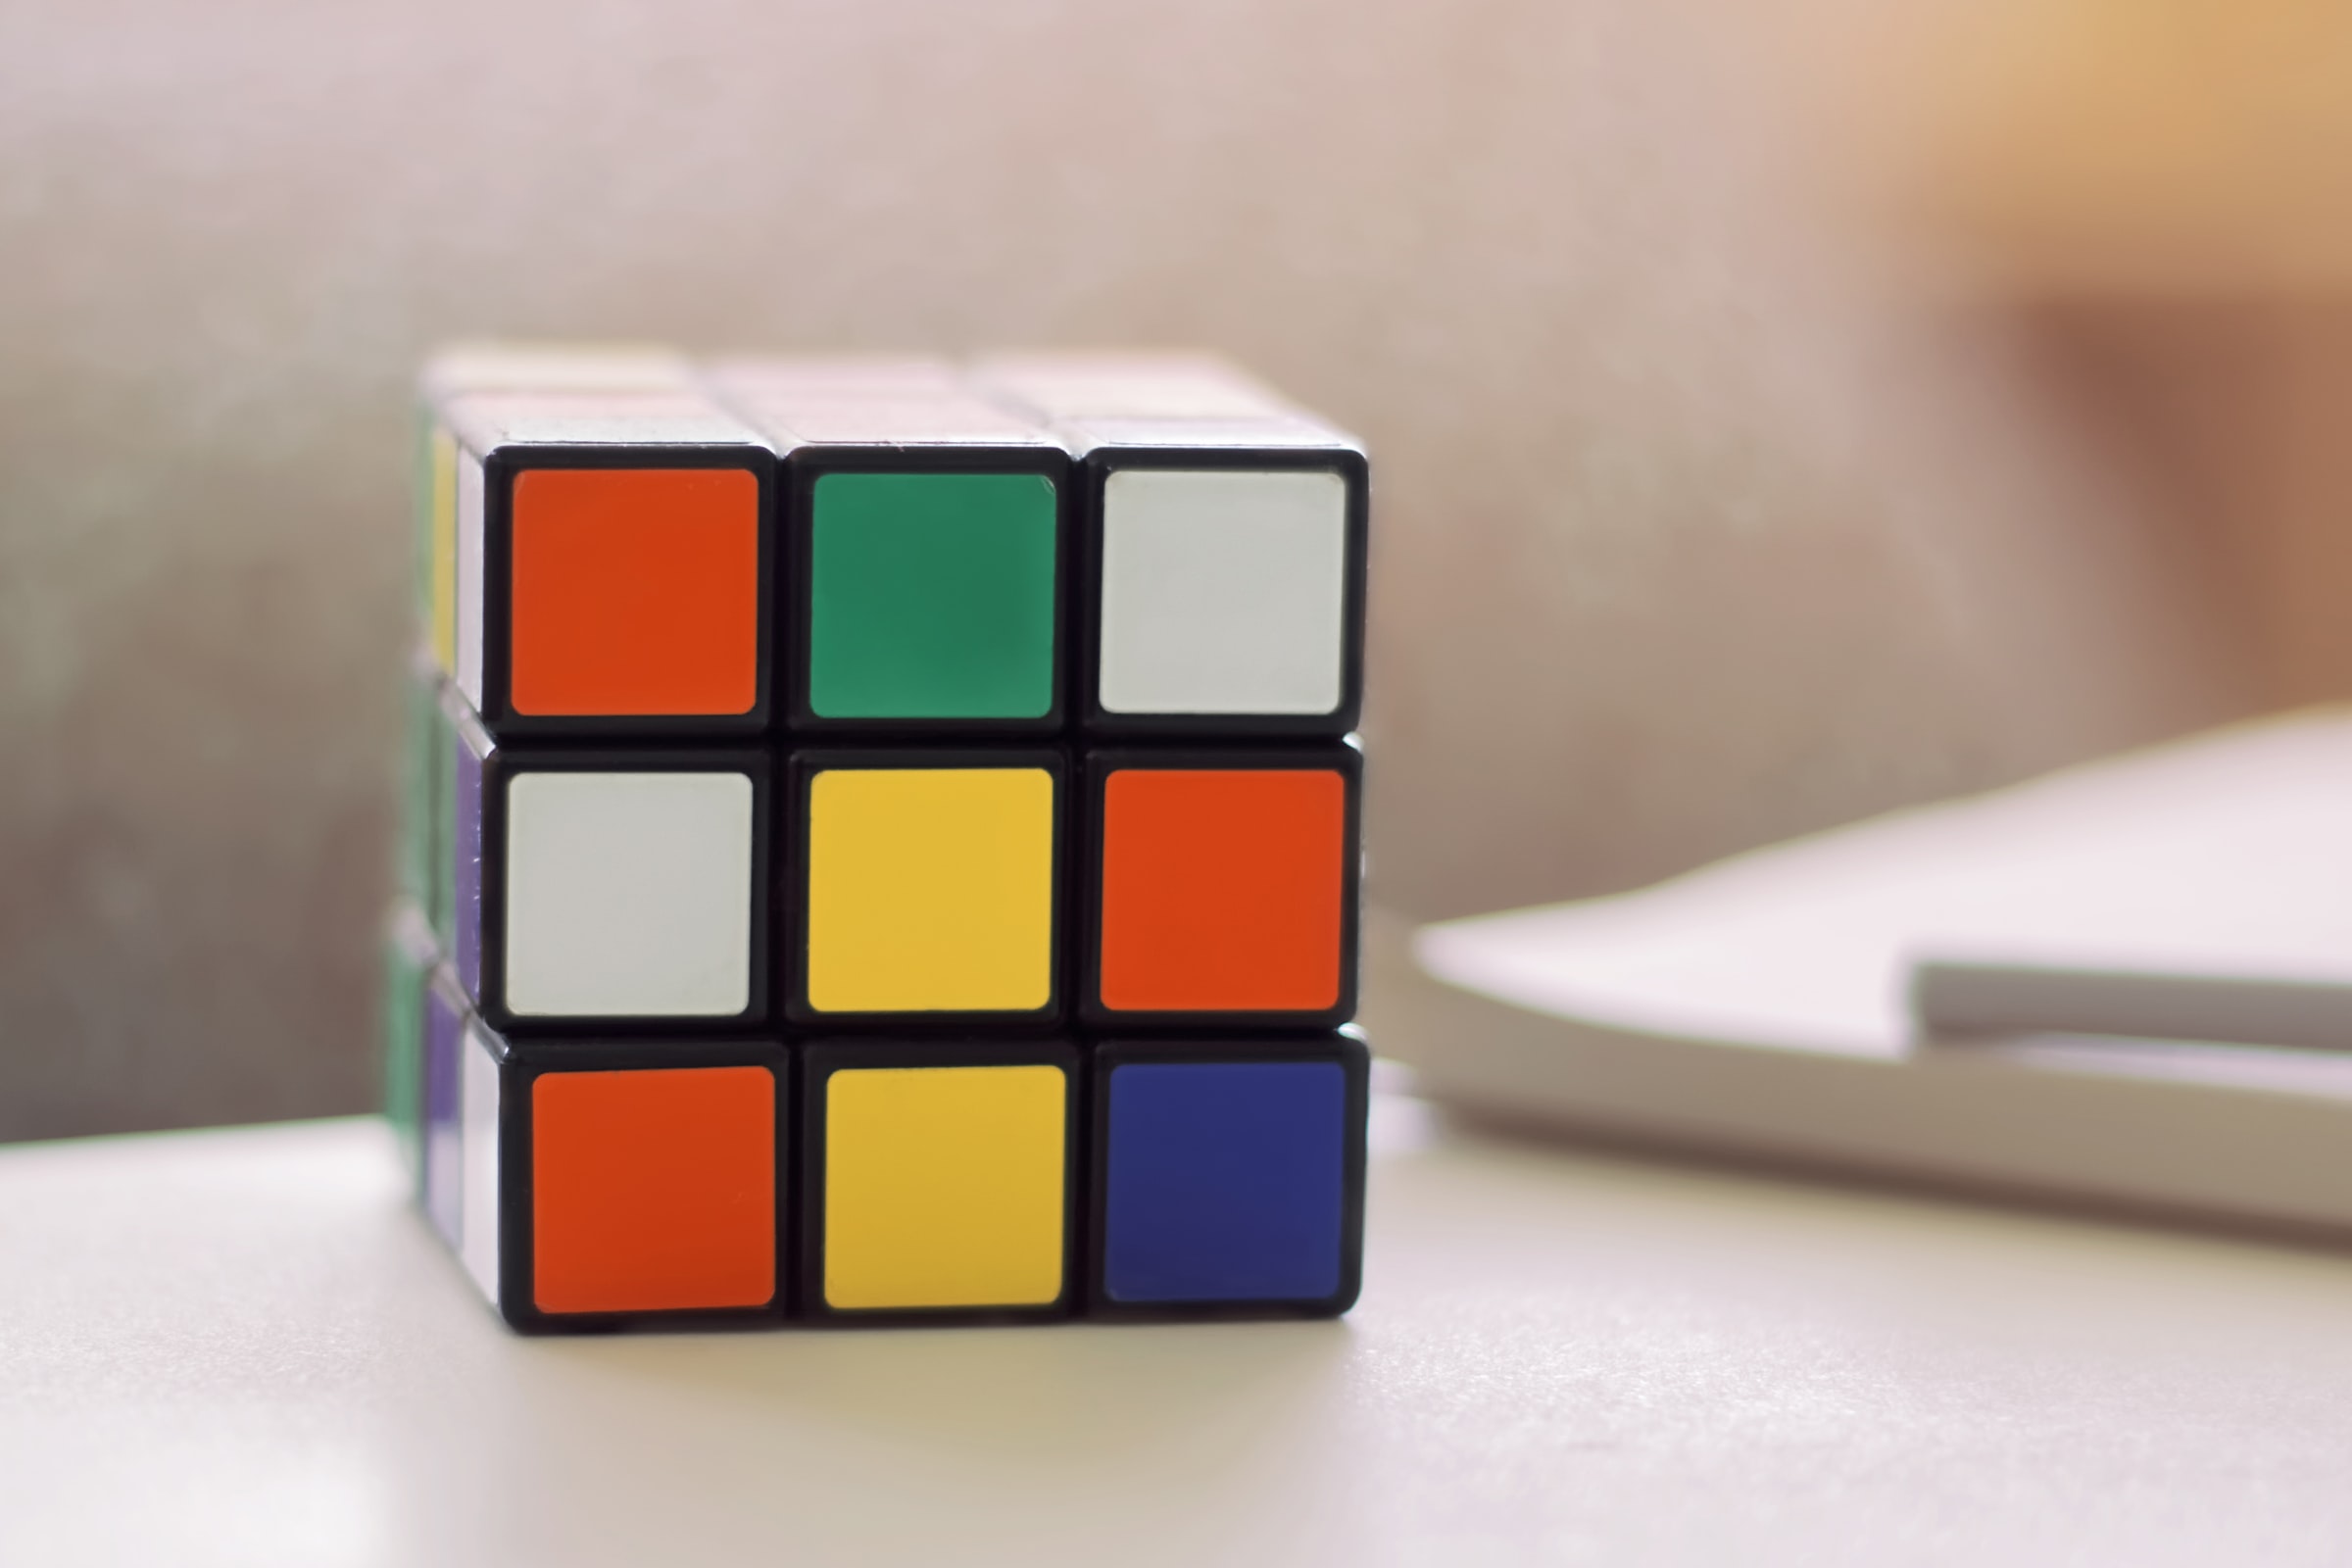 close up view of rubik's cube, handheld games as a hobby to cope with stress